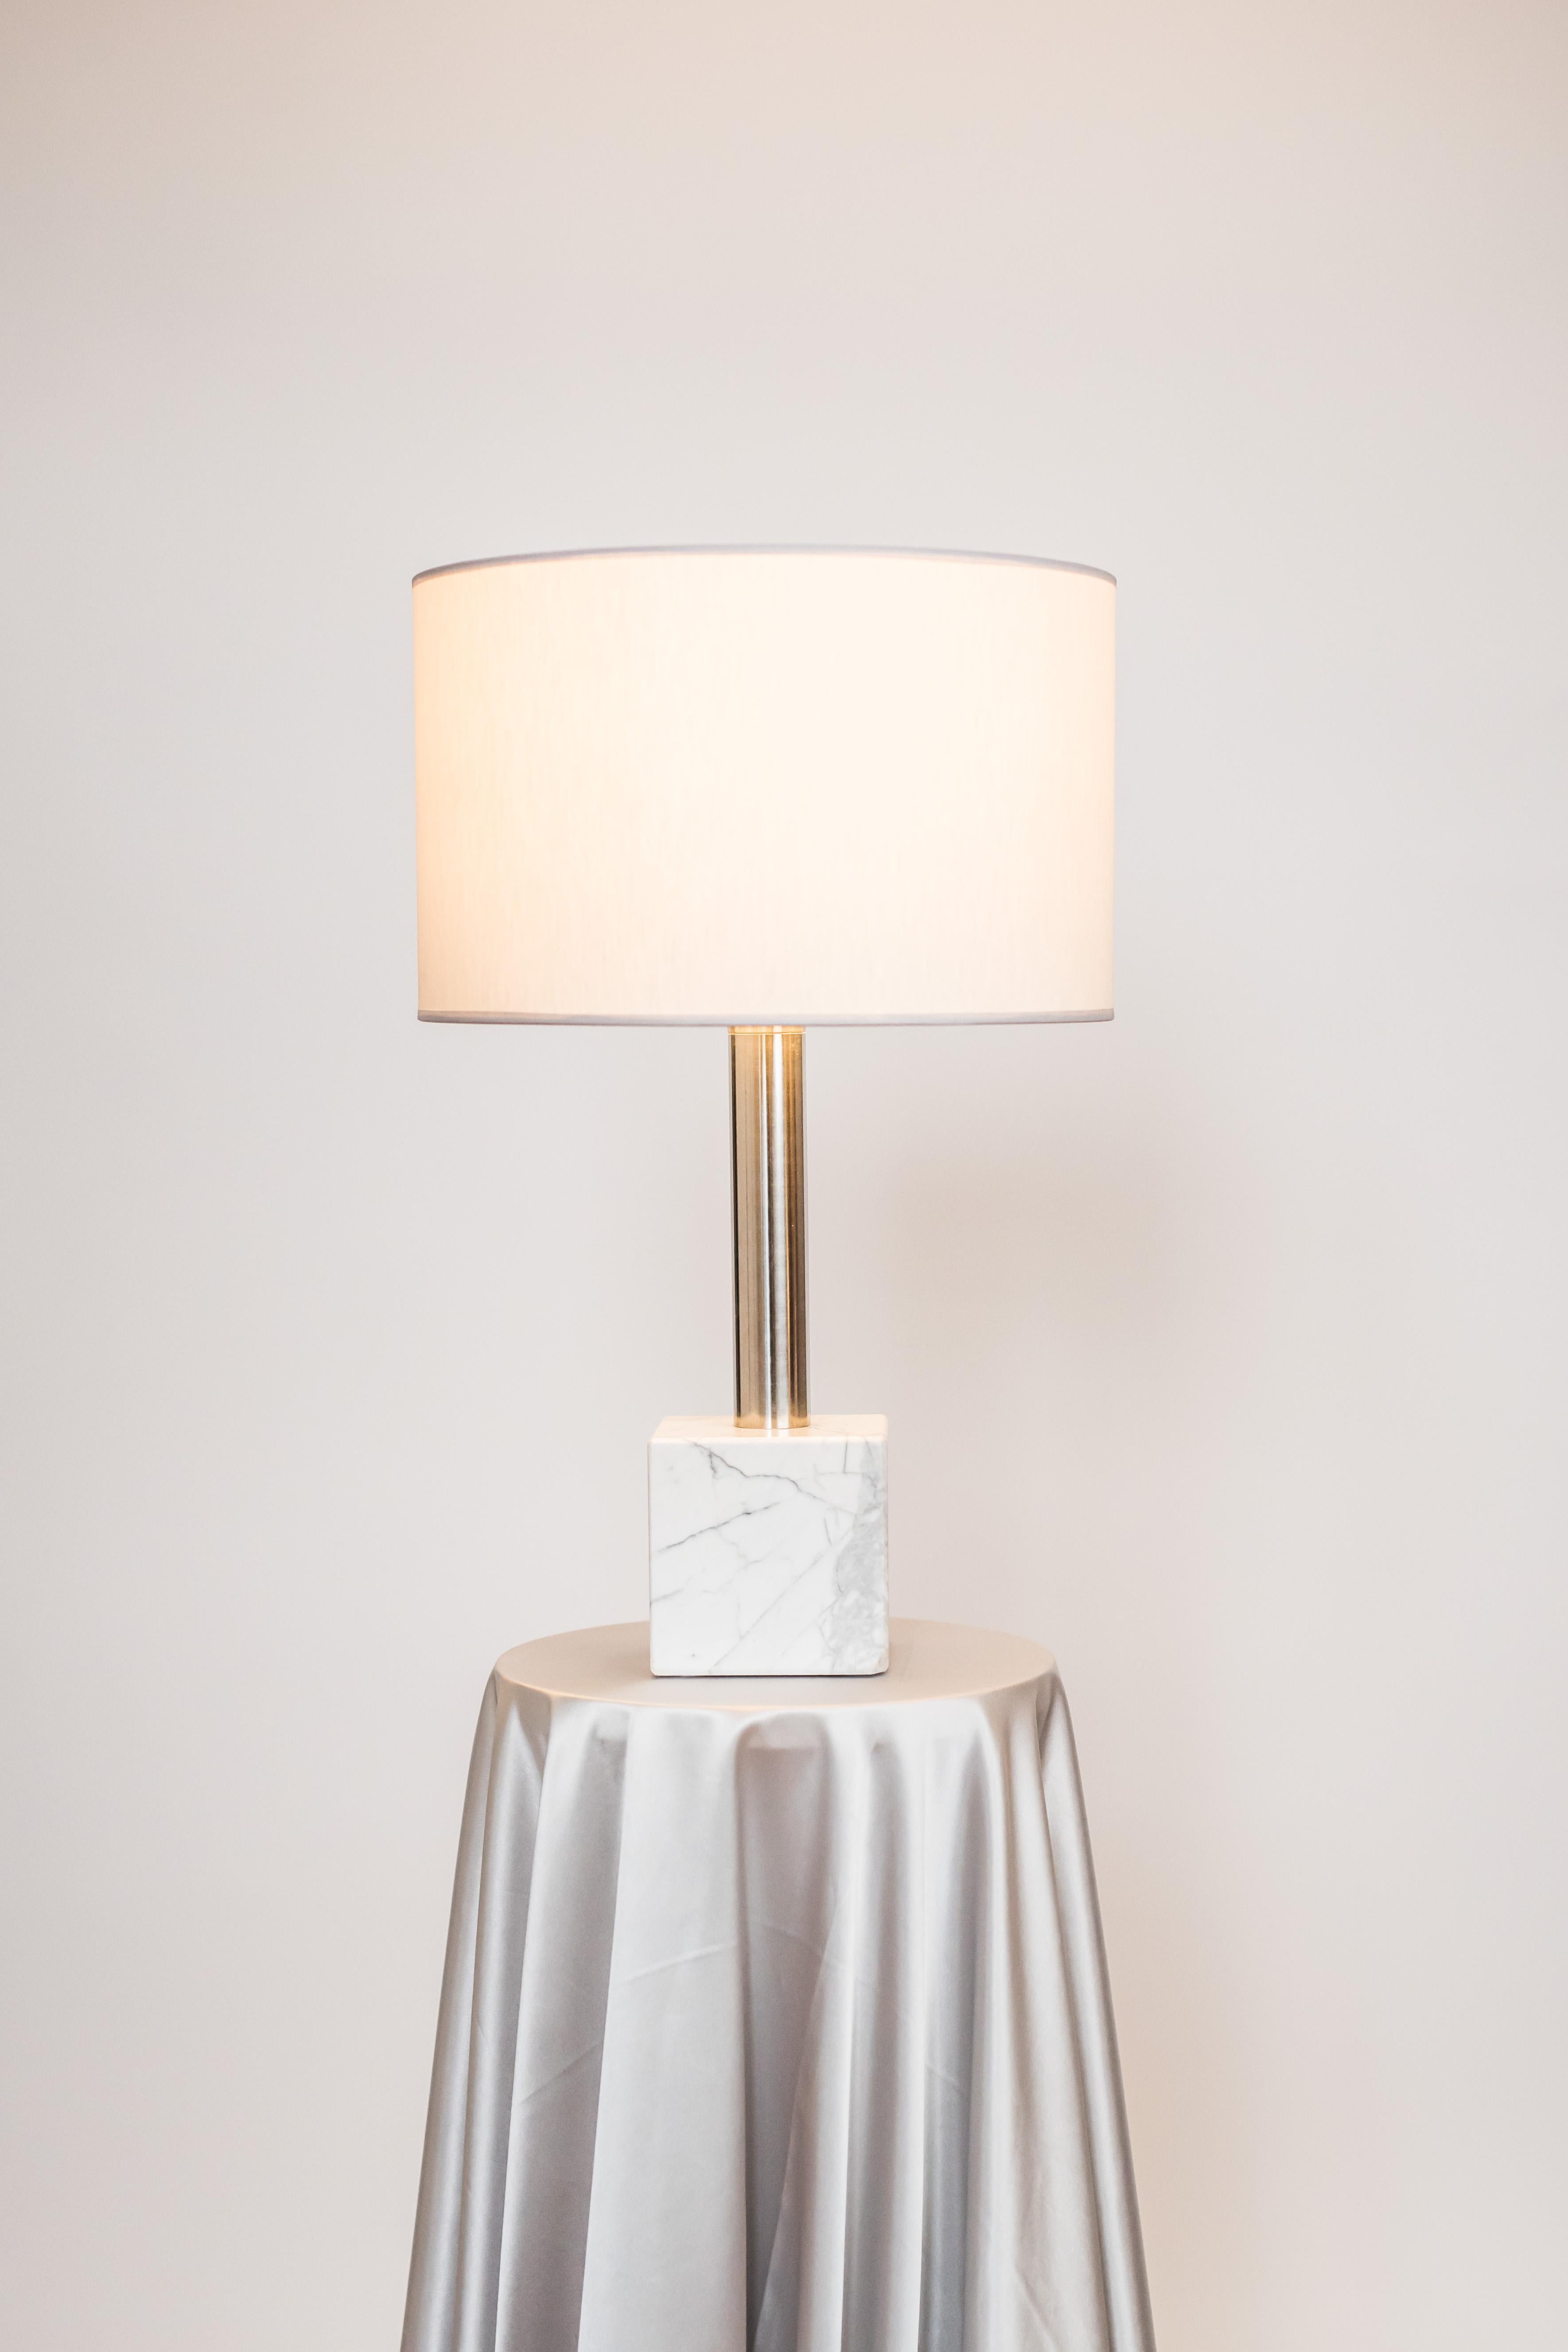 Brass sculpted table lamp by Brajak Vitberg
Athens 1.2
Mura marble (also available with Carrara marble)
Polished brass
Dimensions: 59 x 35 x 35 cm
white or black cotton lampshade, cotton wiring


Bijelic and Brajak are two architects from Ljubljana,